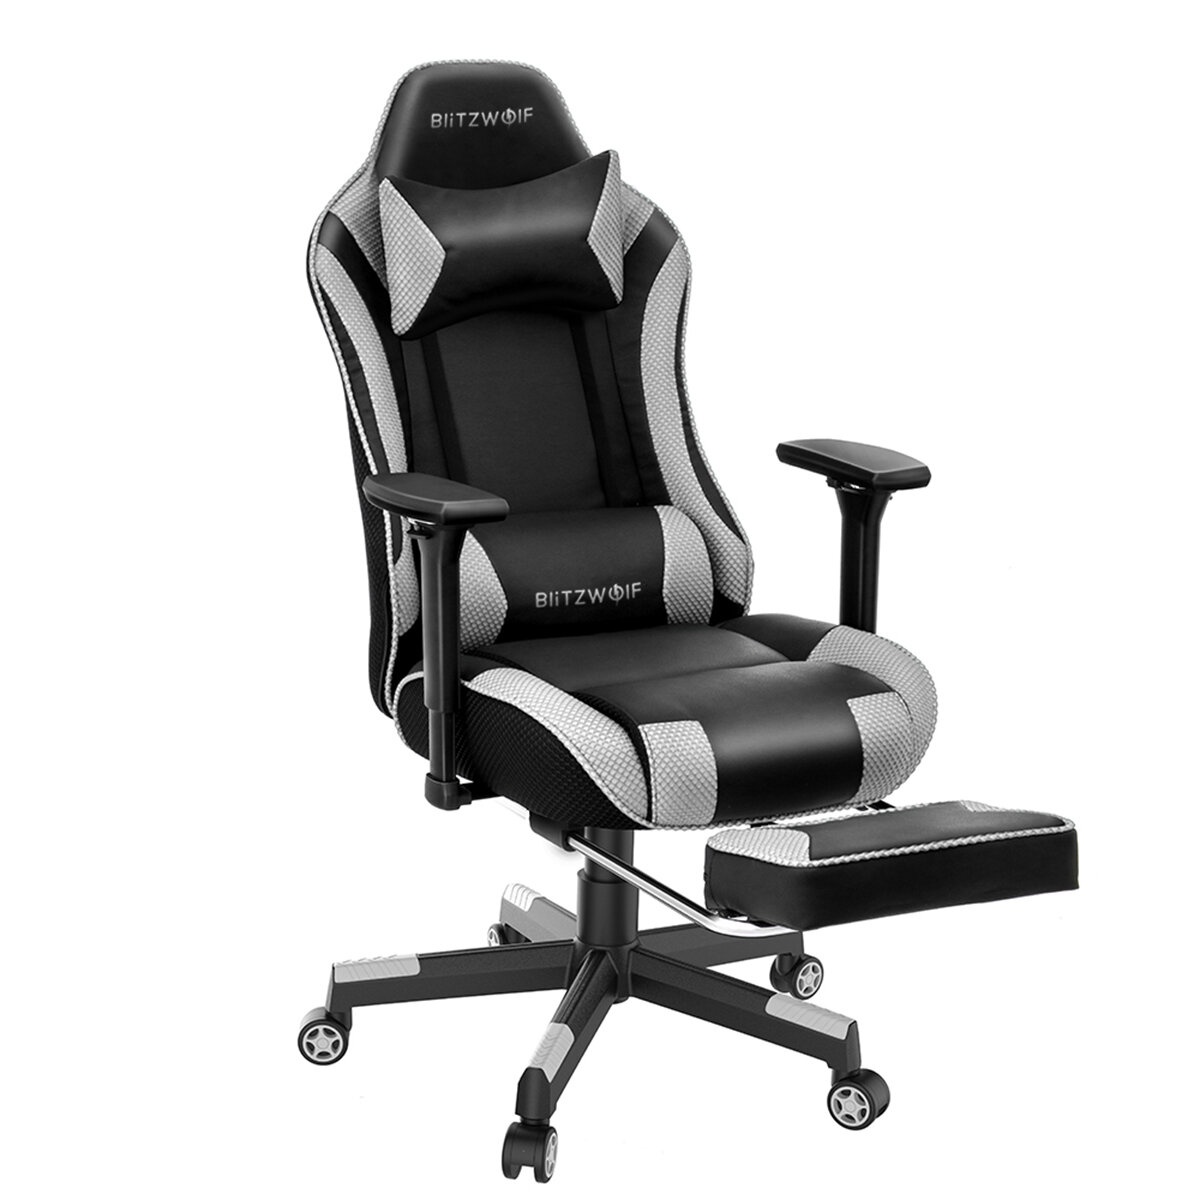 Image of BlitzWolf® BW-GC5 Gaming Chair Ergonomic Design High Back Gamer Racing Chairs 360°Swivel 4D Adjustable Armrest Thicken S